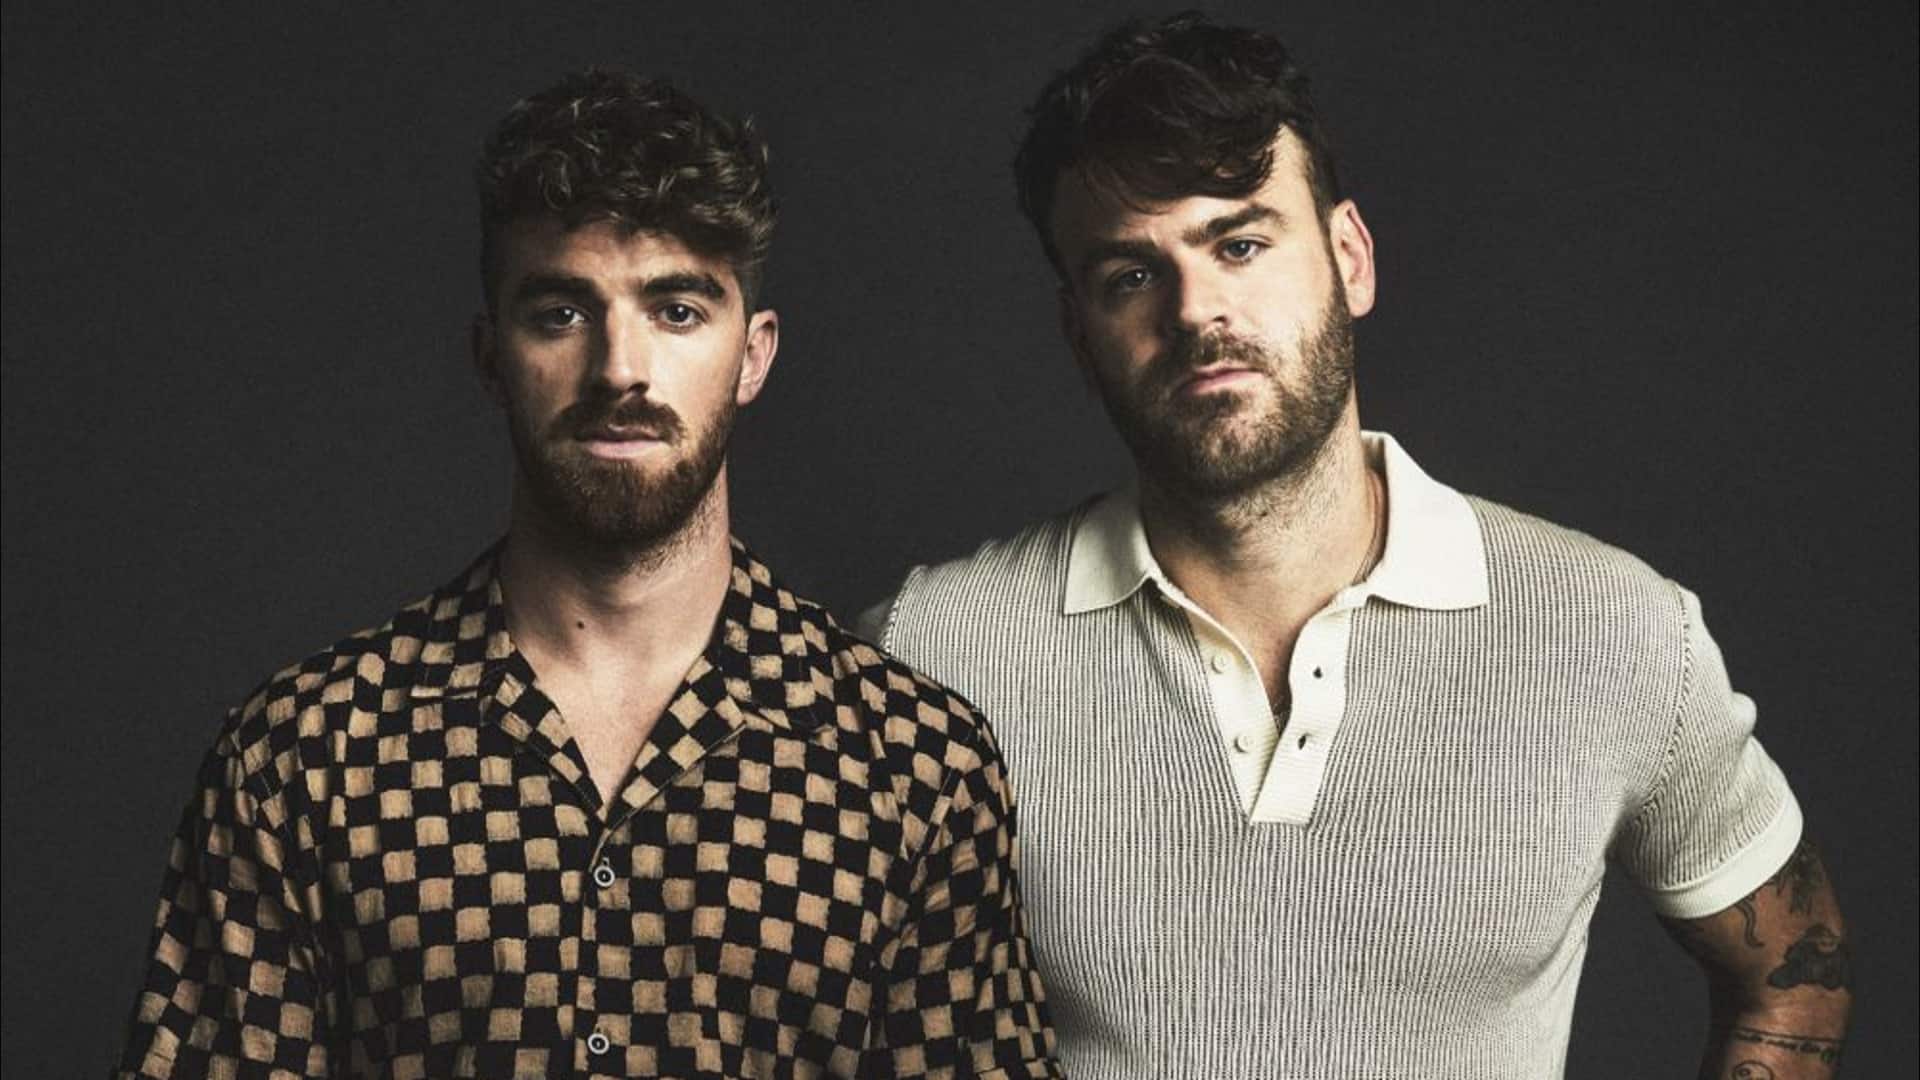 The Chainsmokers to release their album on May 13, tracklist revealed